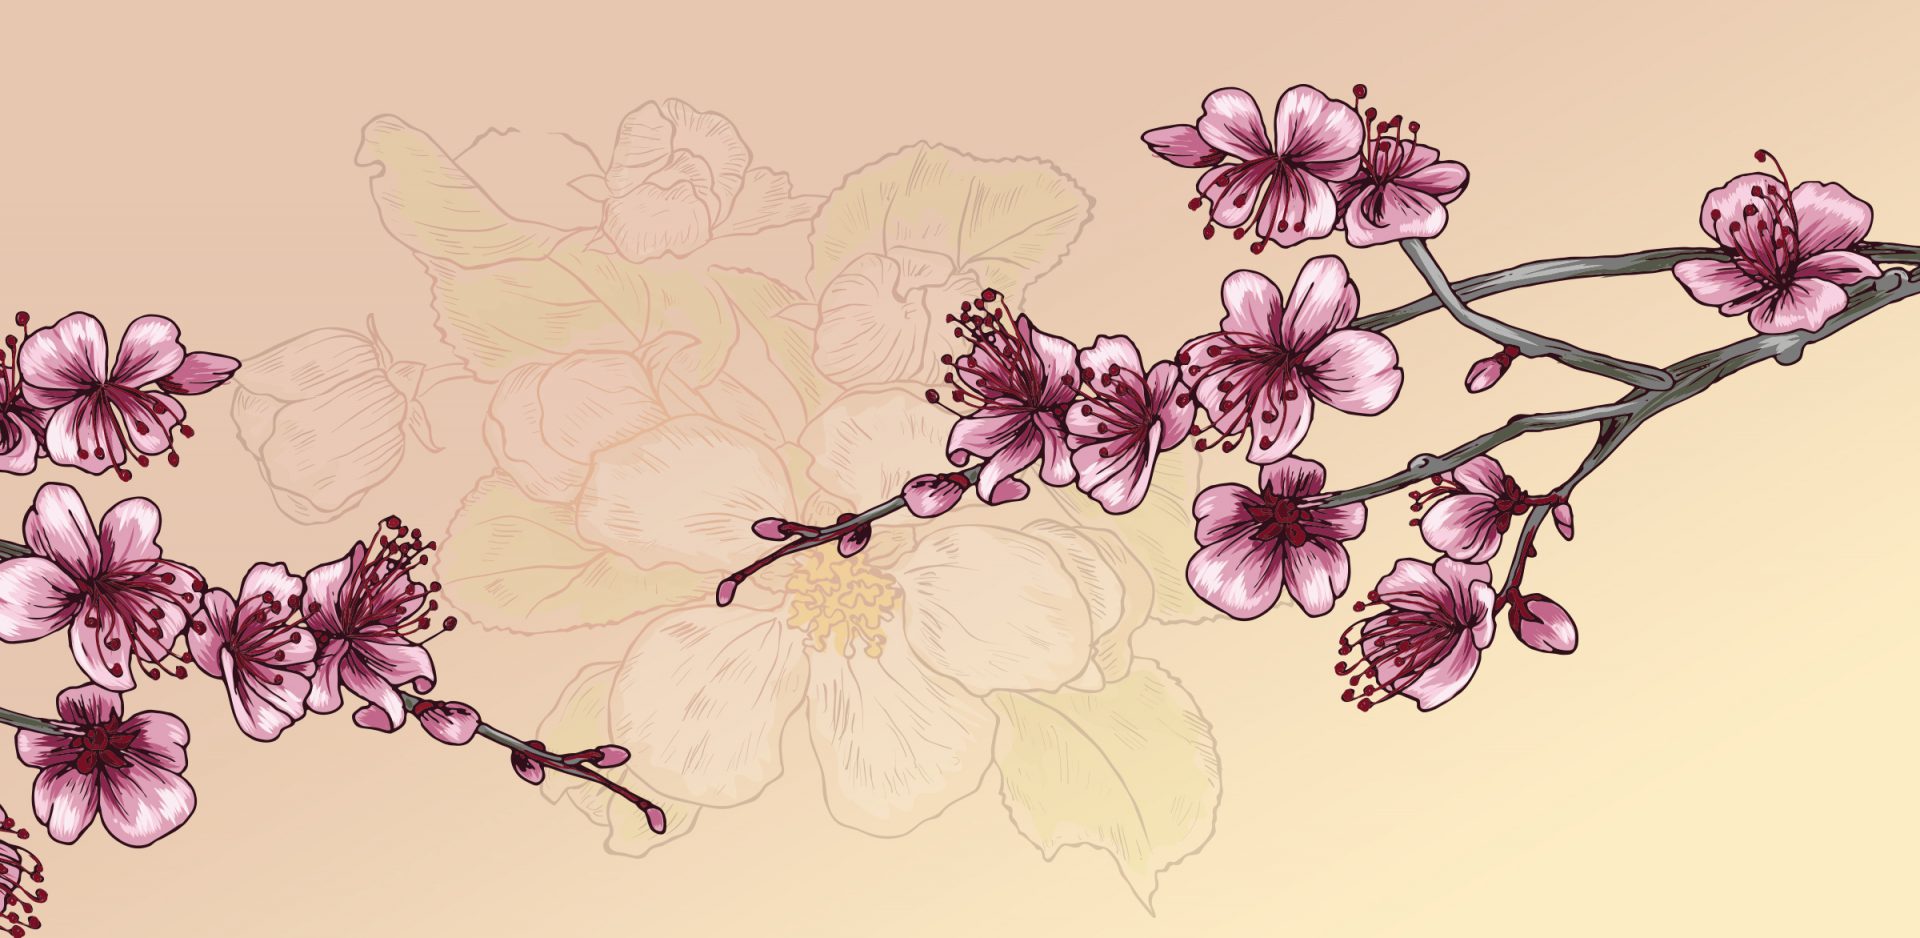 A drawing of flowers with pink petals and leaves.